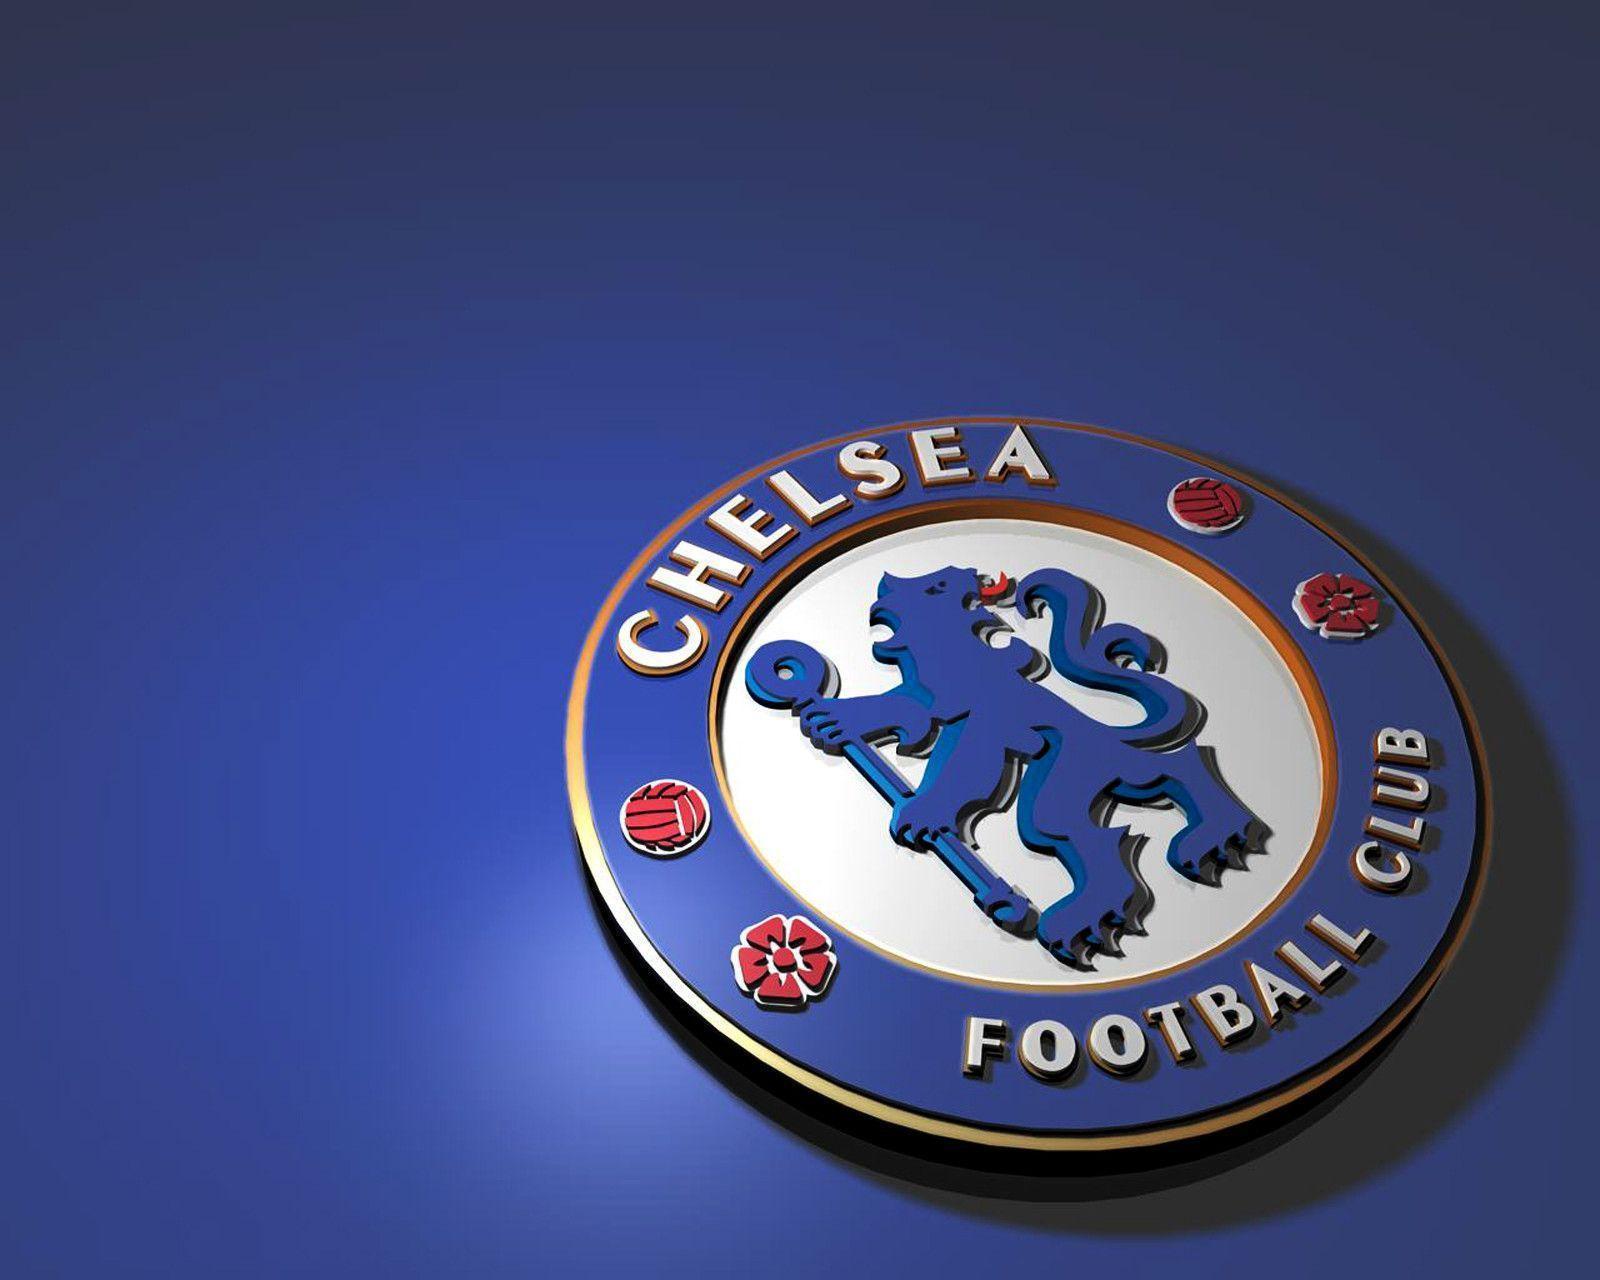 Top Football Clubs logos Wallpaper. It&;s All About Wallpaper